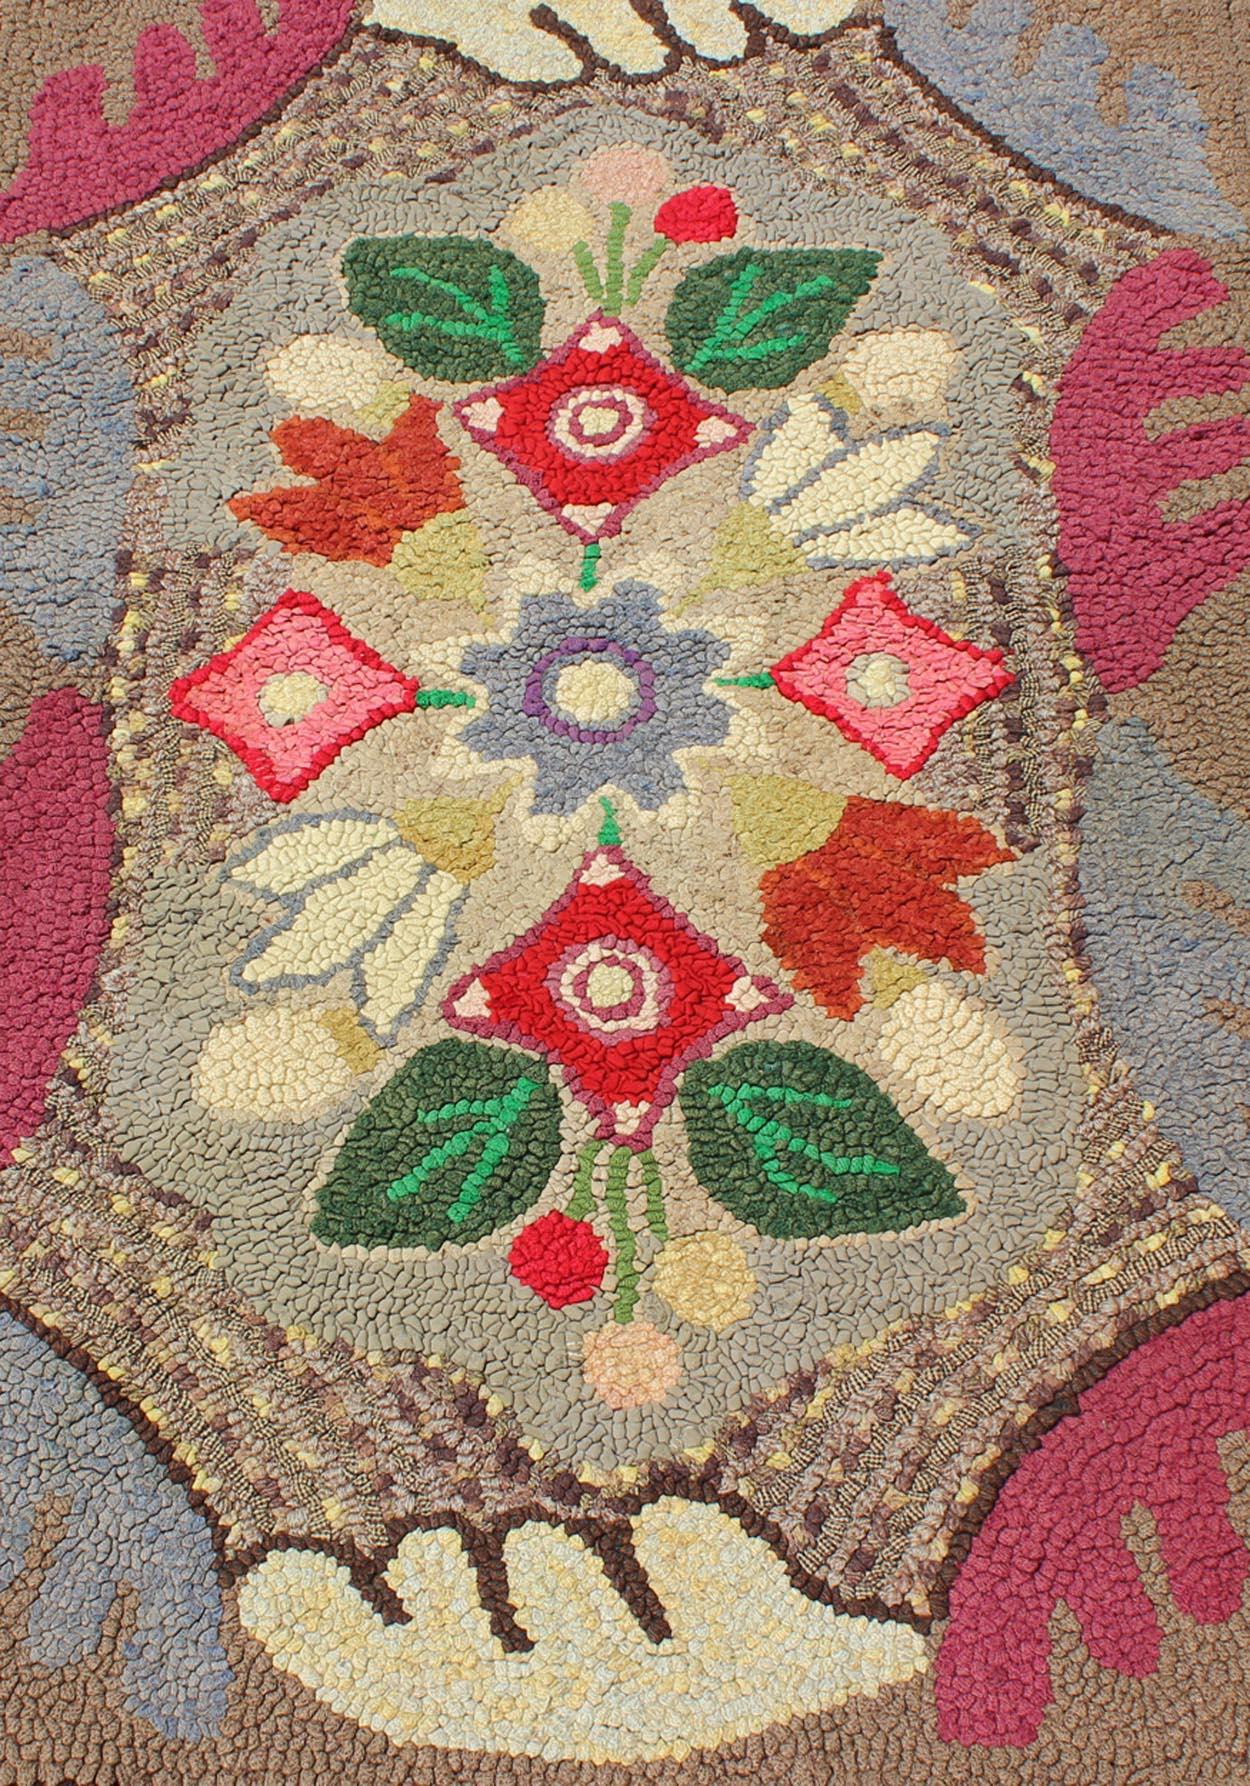 Antique American Hooked Floral Rug with Multi Colors Light Brown, Green, Yellow In Excellent Condition For Sale In Atlanta, GA